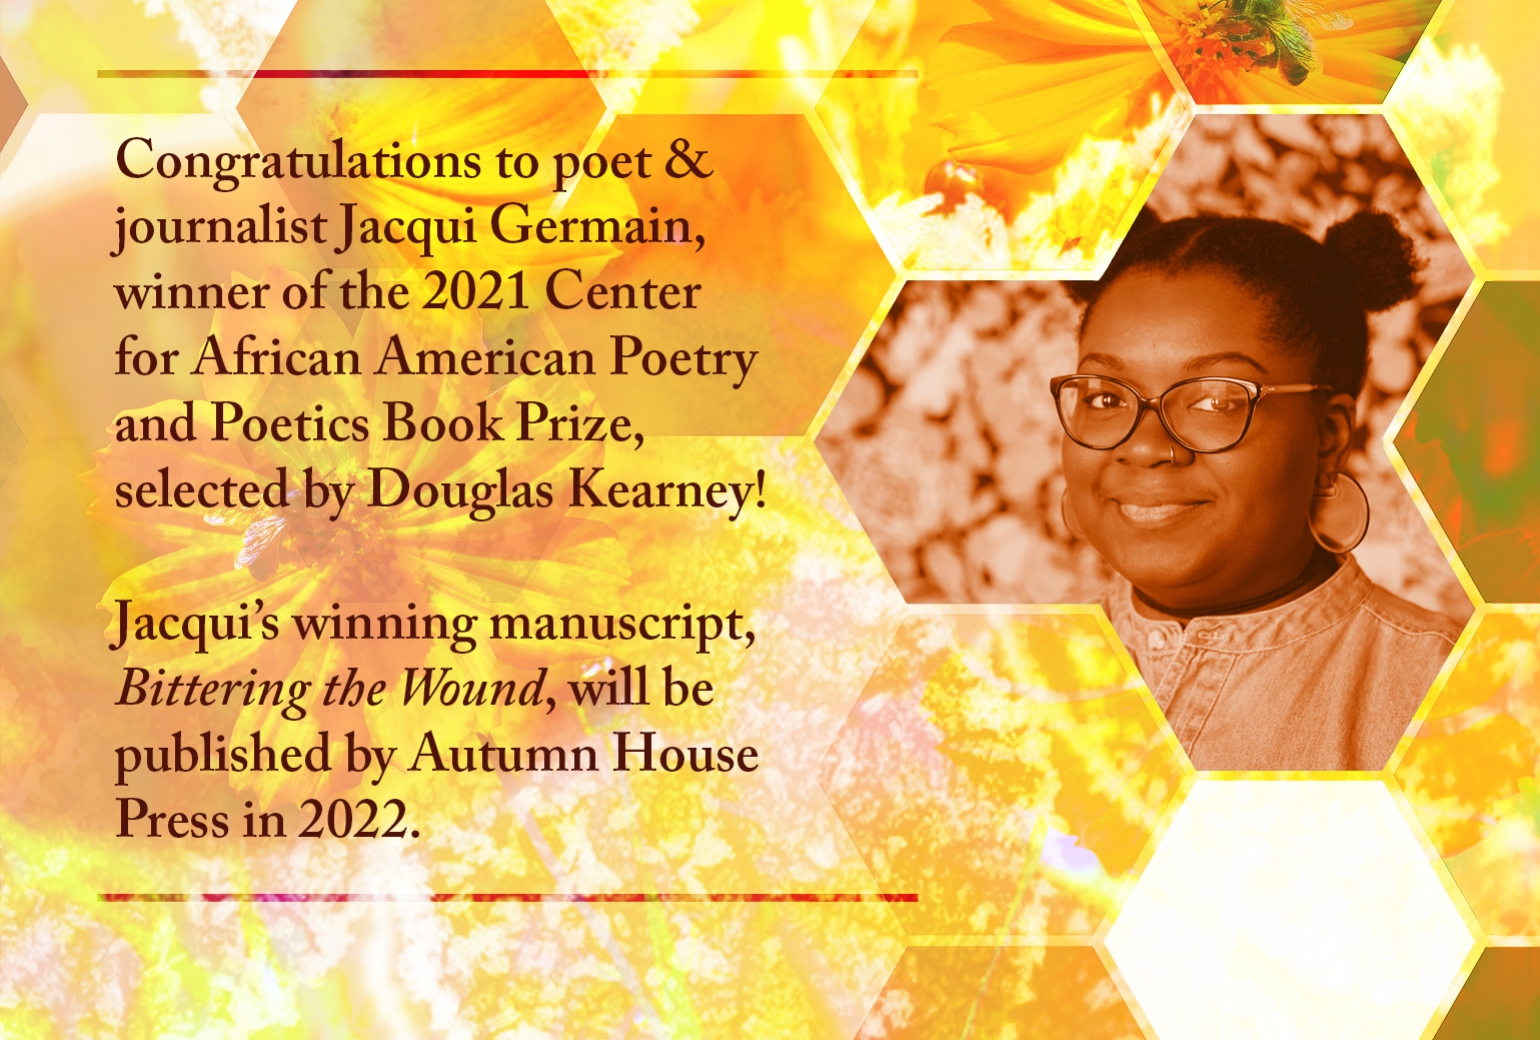 Text and image banner. Additional info: "Jacqui's winning manuscript, Bittering the Wound, will be published by Autumn House Press in 2022."